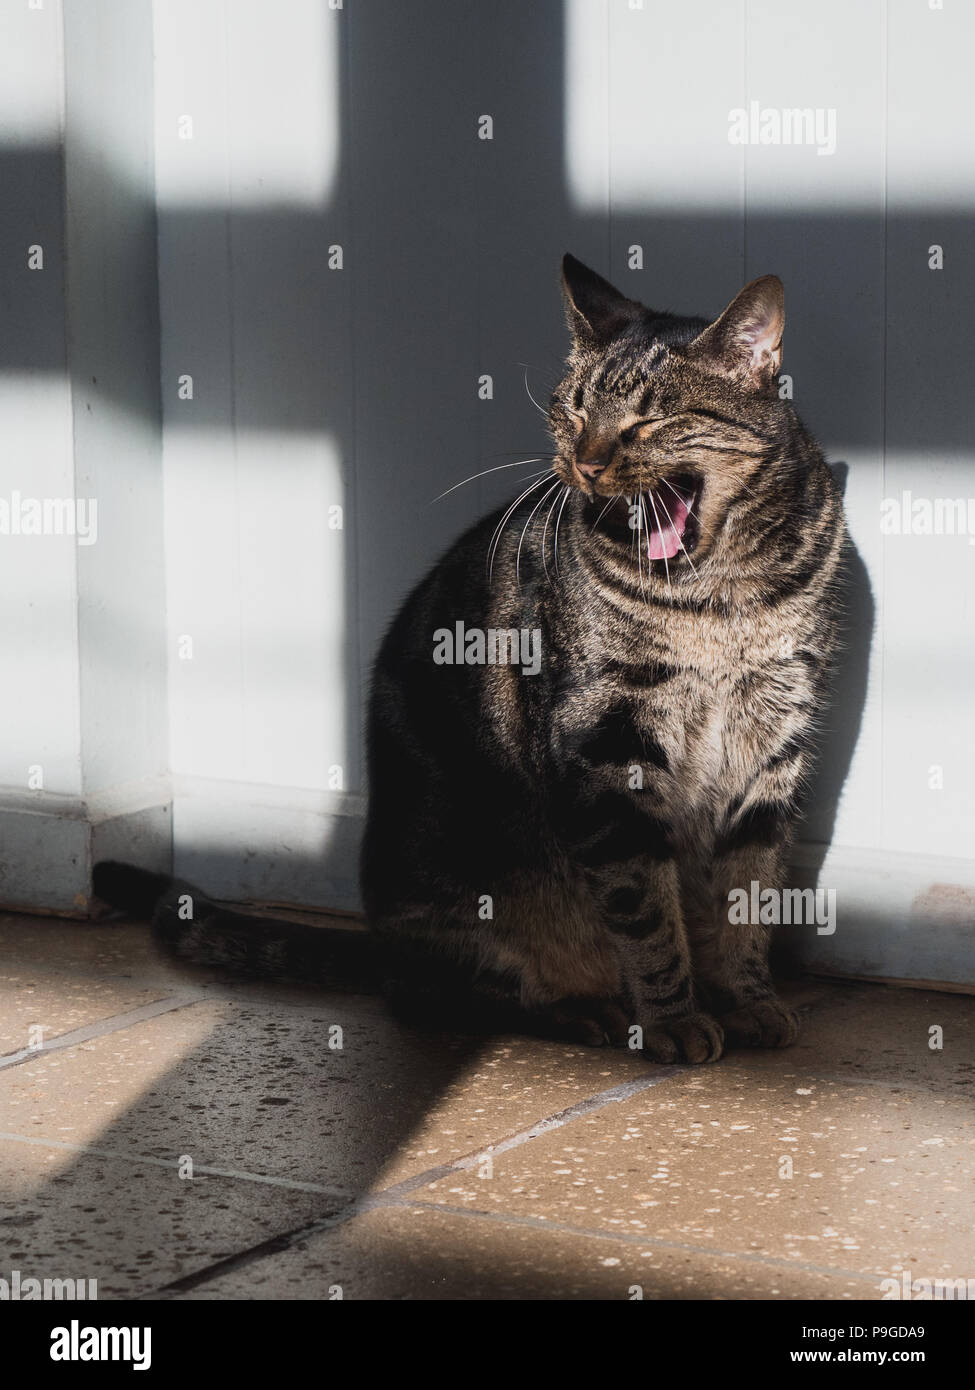 Cat yawning in window light shadow, mouth wide open Stock Photo